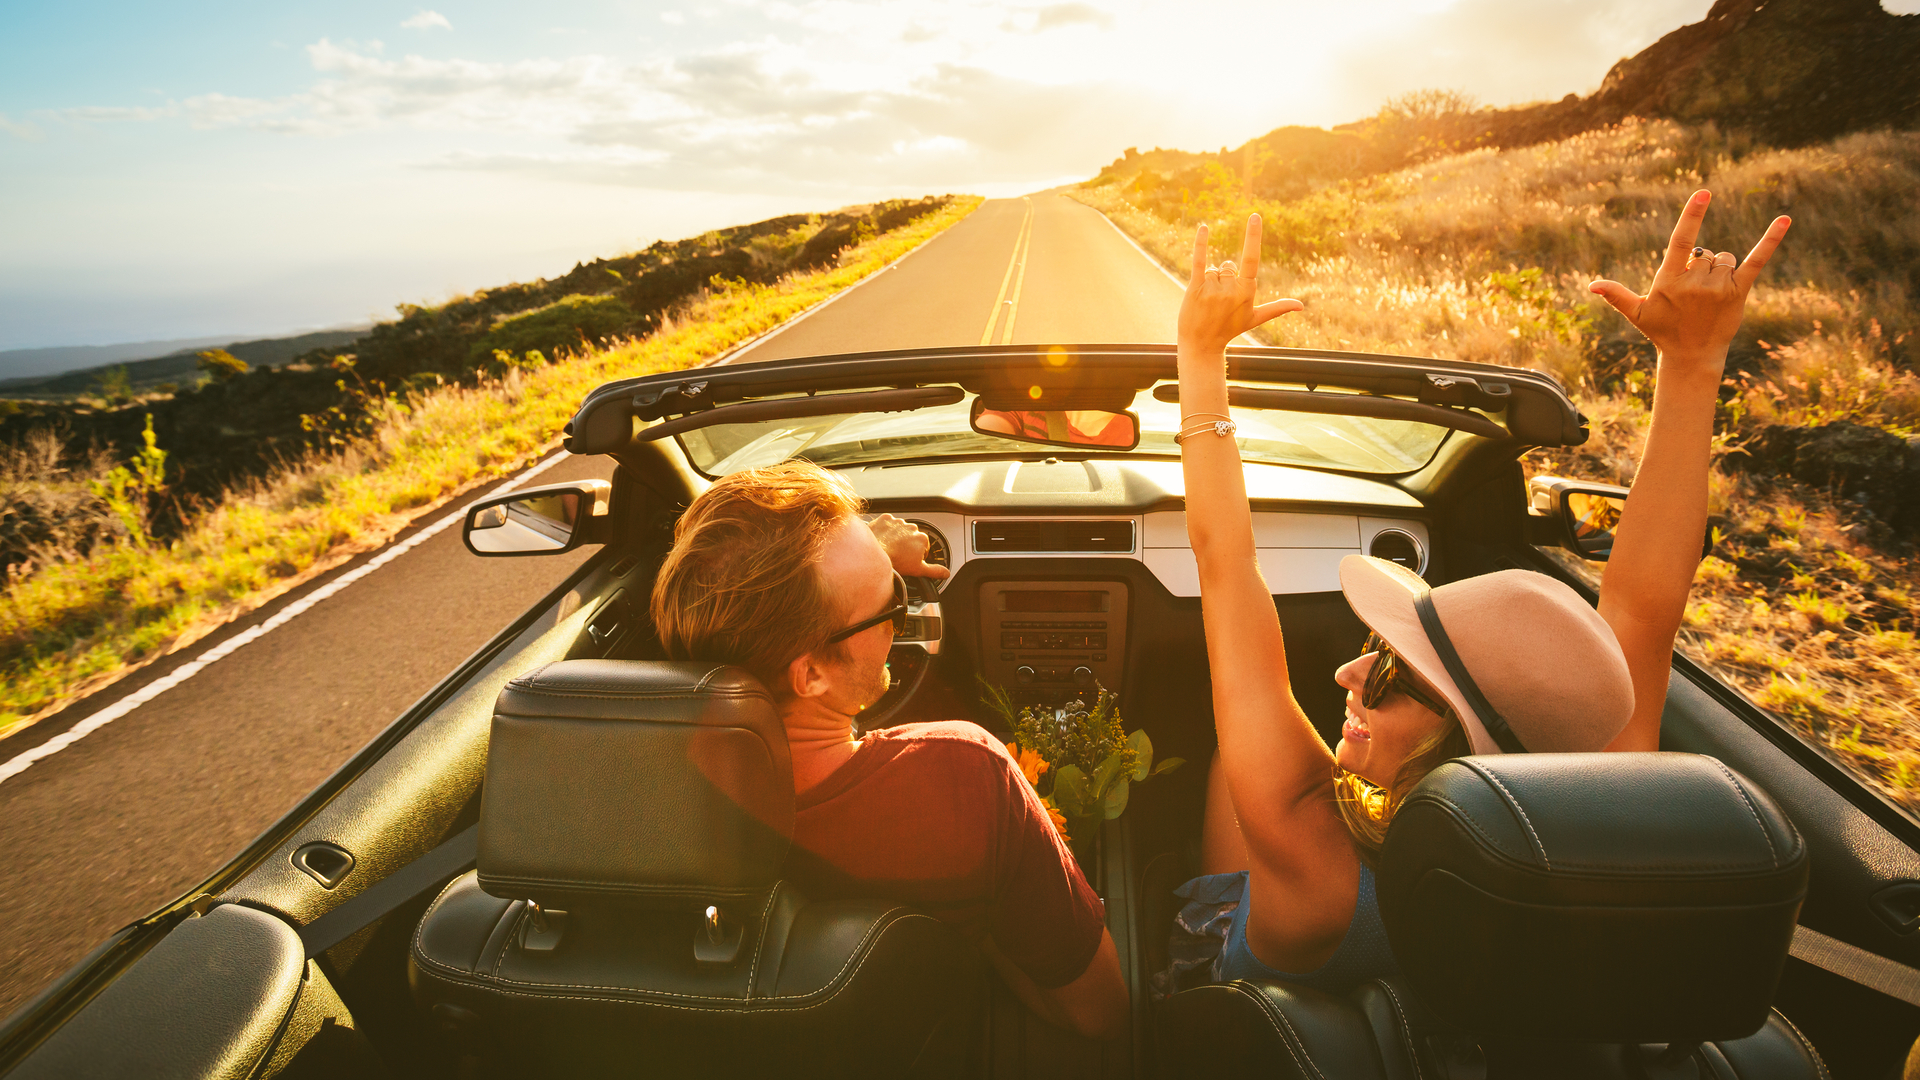 10 Road Trip Essentials: How to Stay Safe, Sane, and on Track on the Road